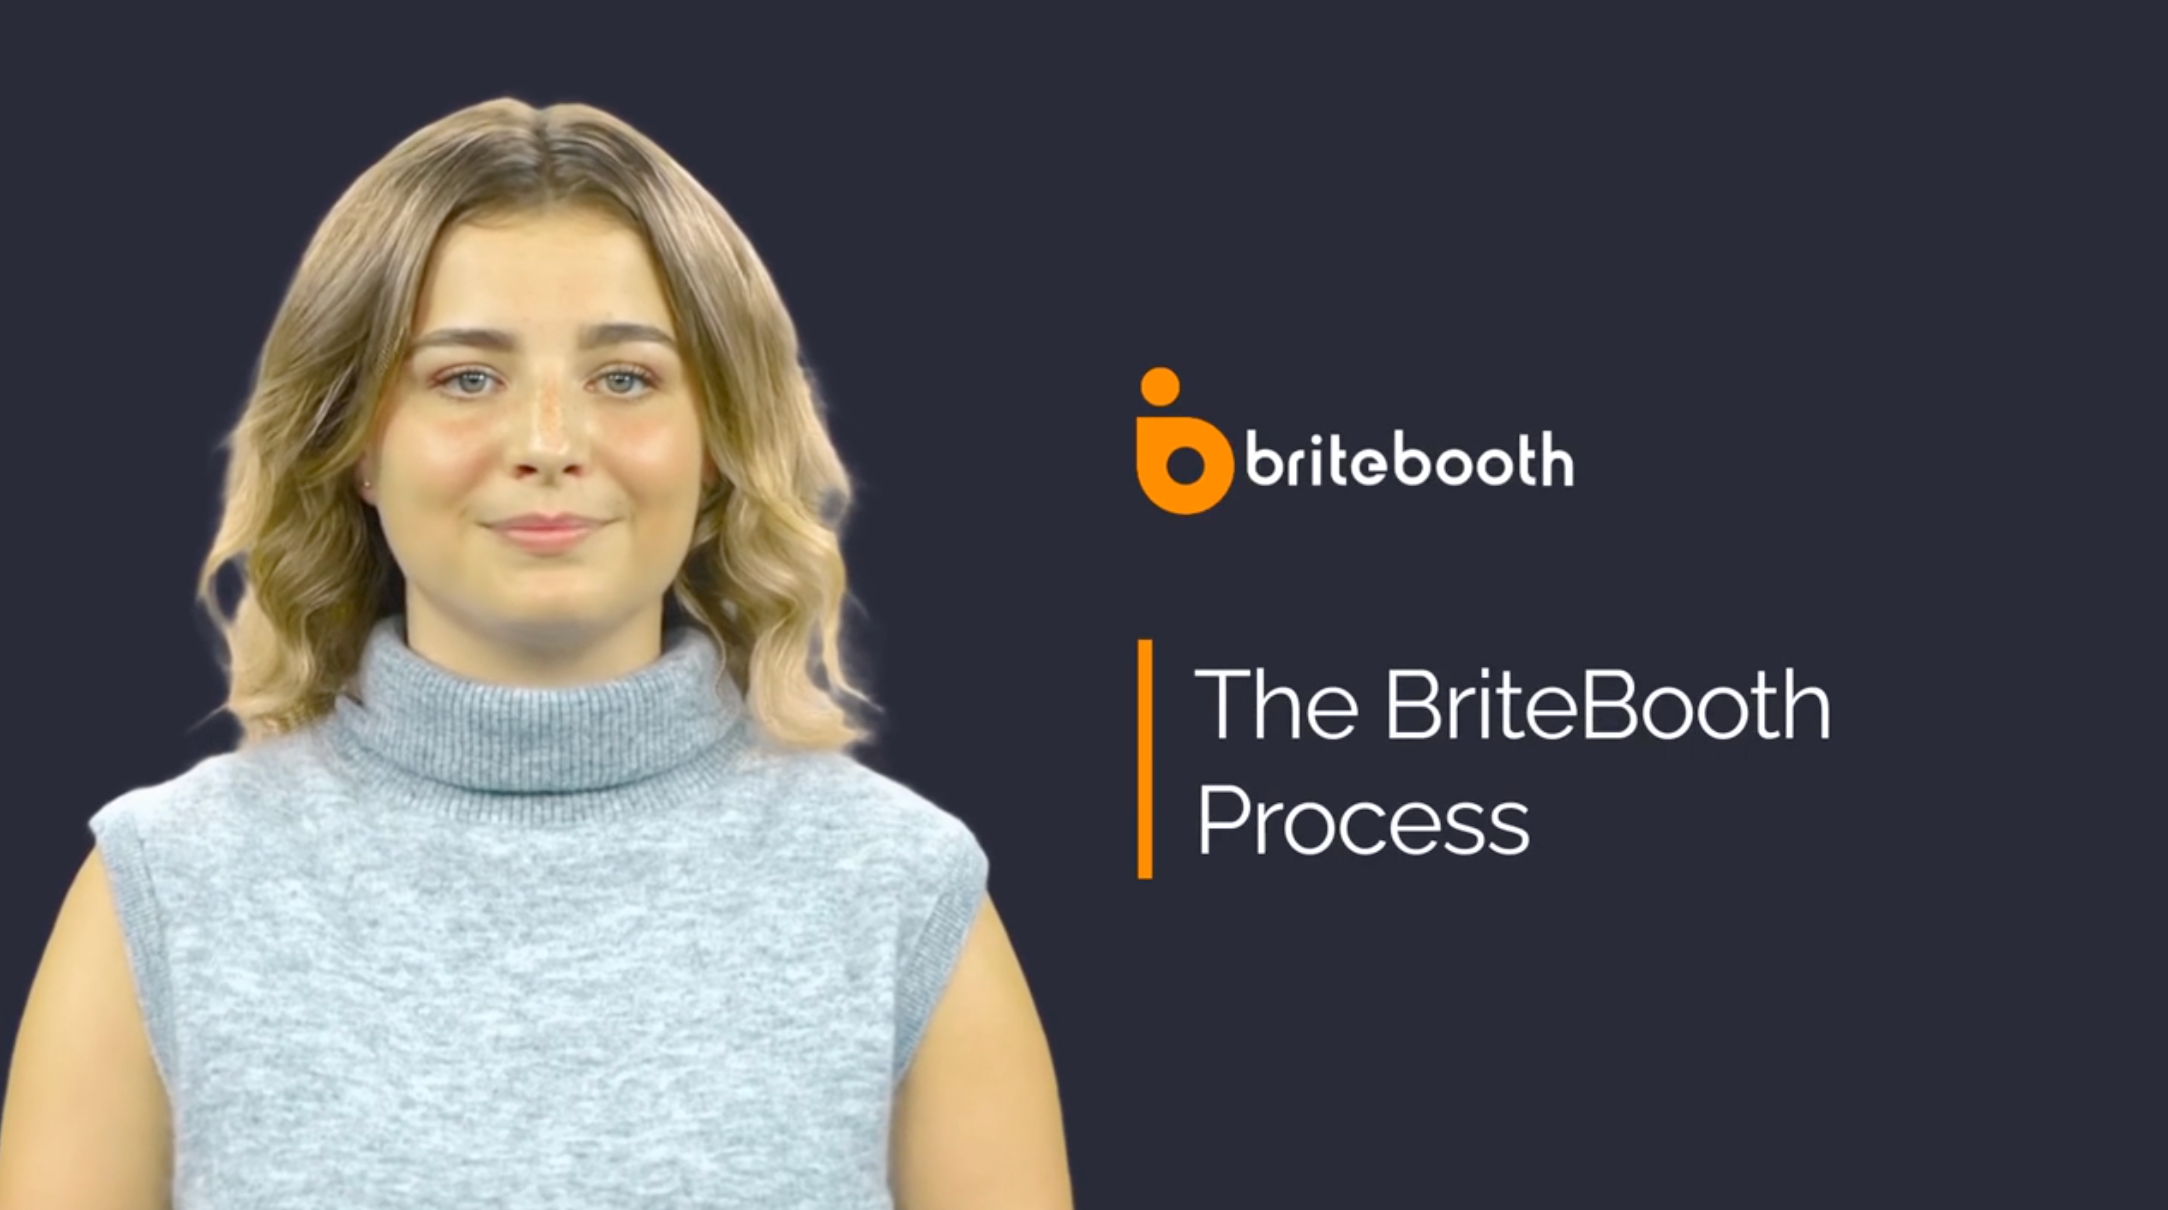 Load video: The BriteBooth Process